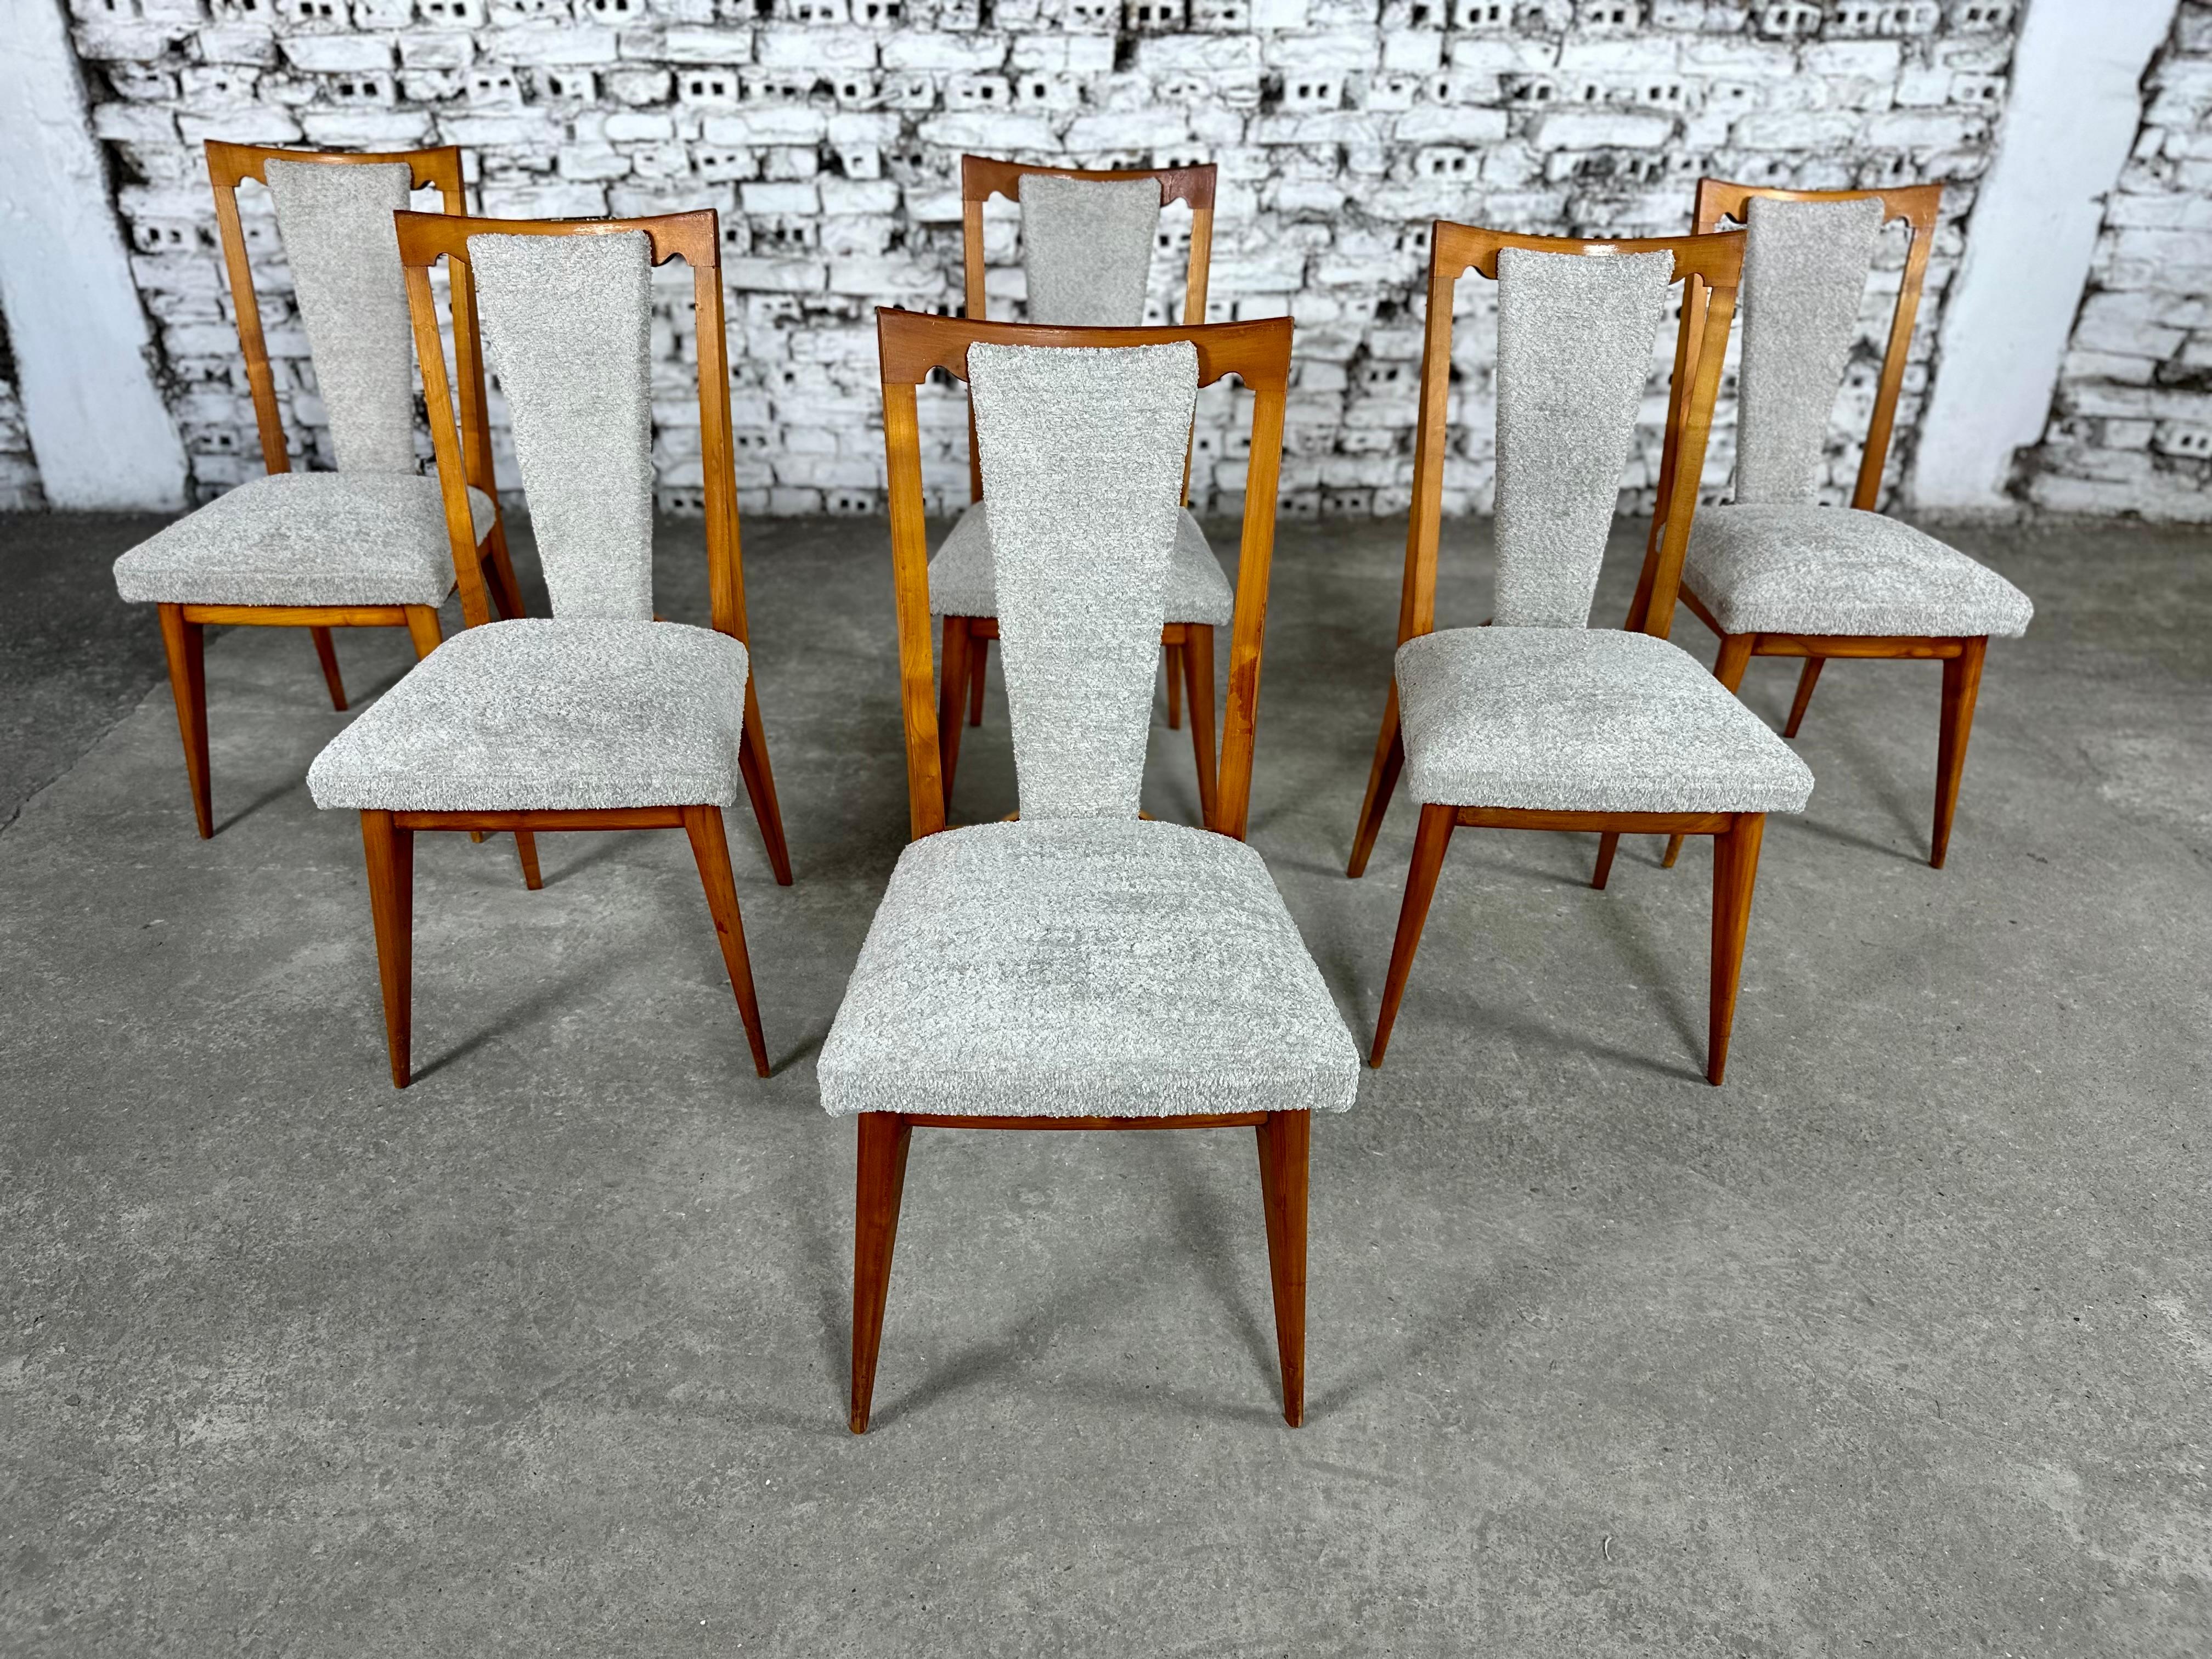 French Art Deco Styled Dining Chairs, Newly Upholstered - Set of 6 For Sale 3